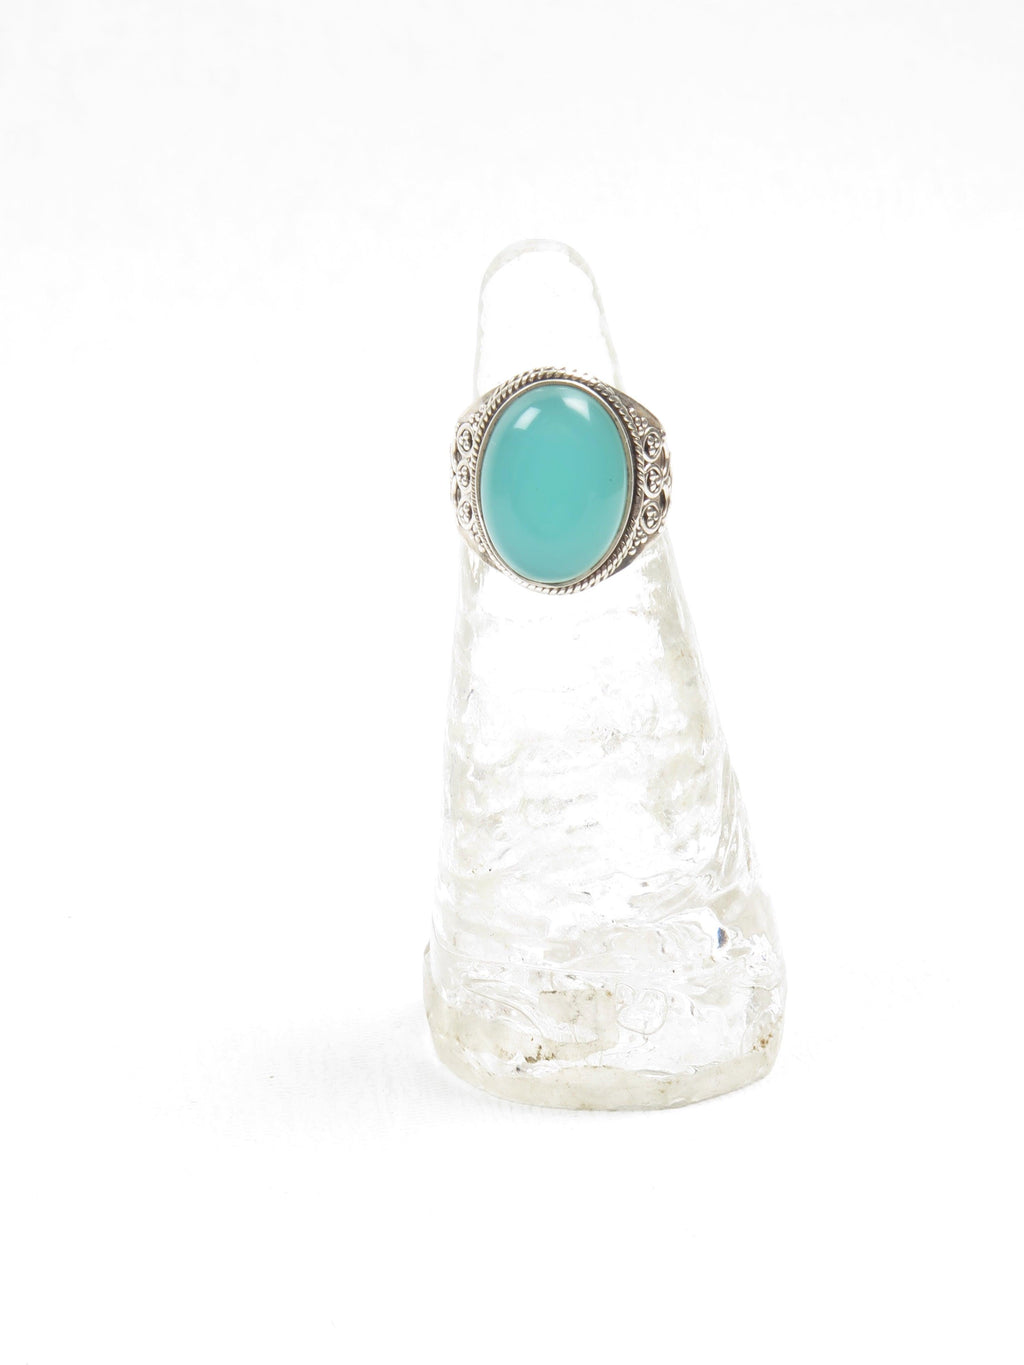 Chalcedony & Silver Ring - The Harlequin